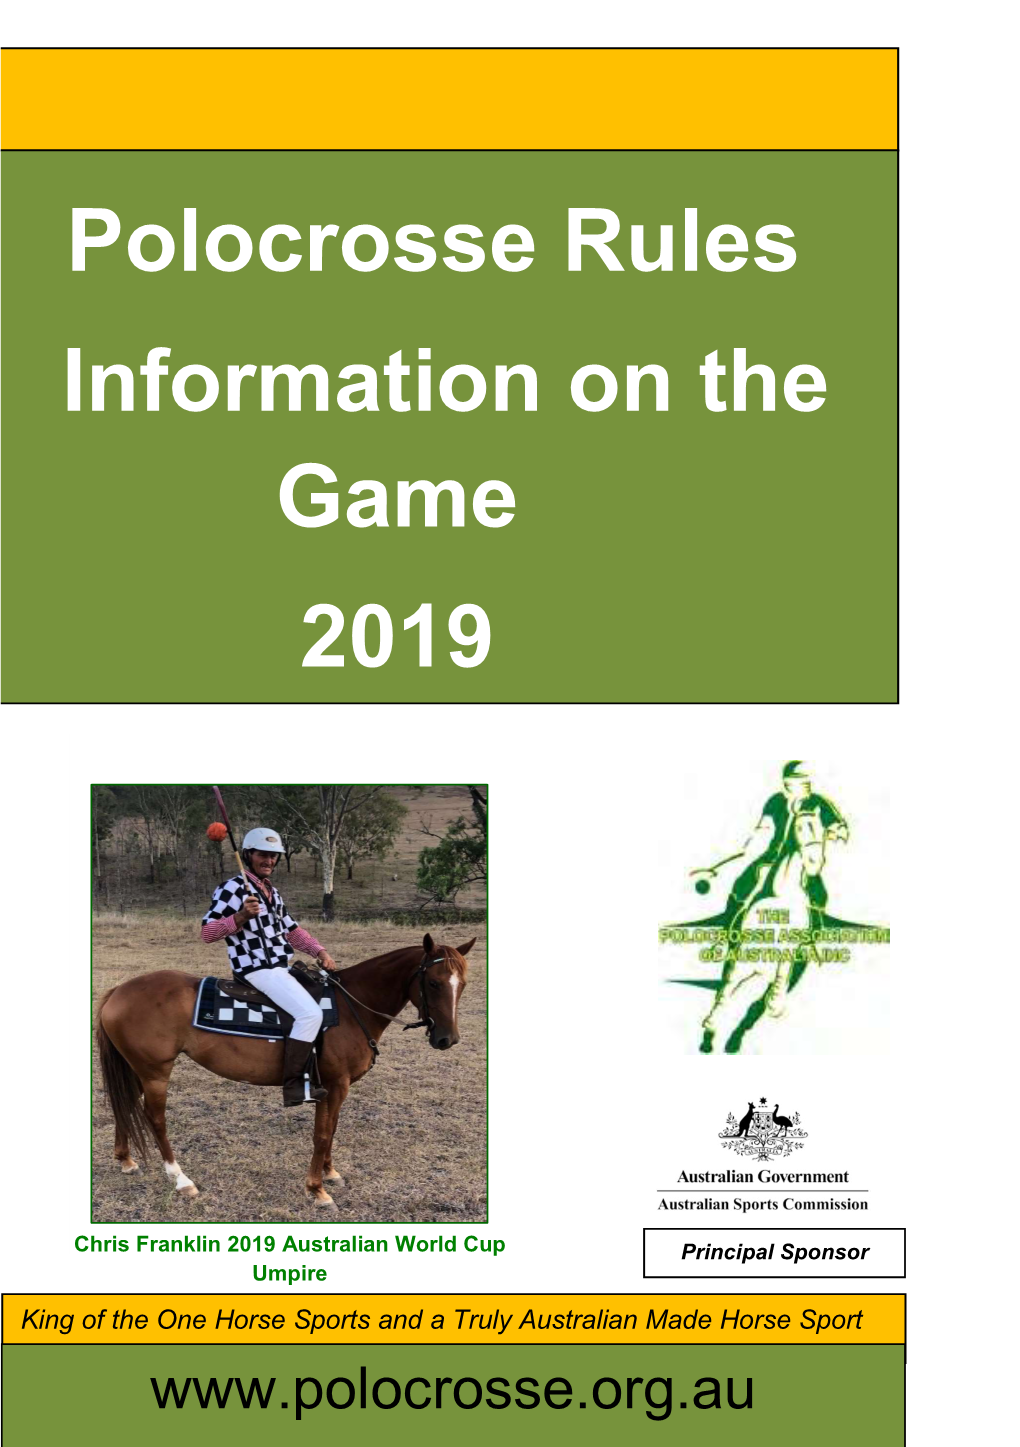 Polocrosse Rules Information on the Game 2019